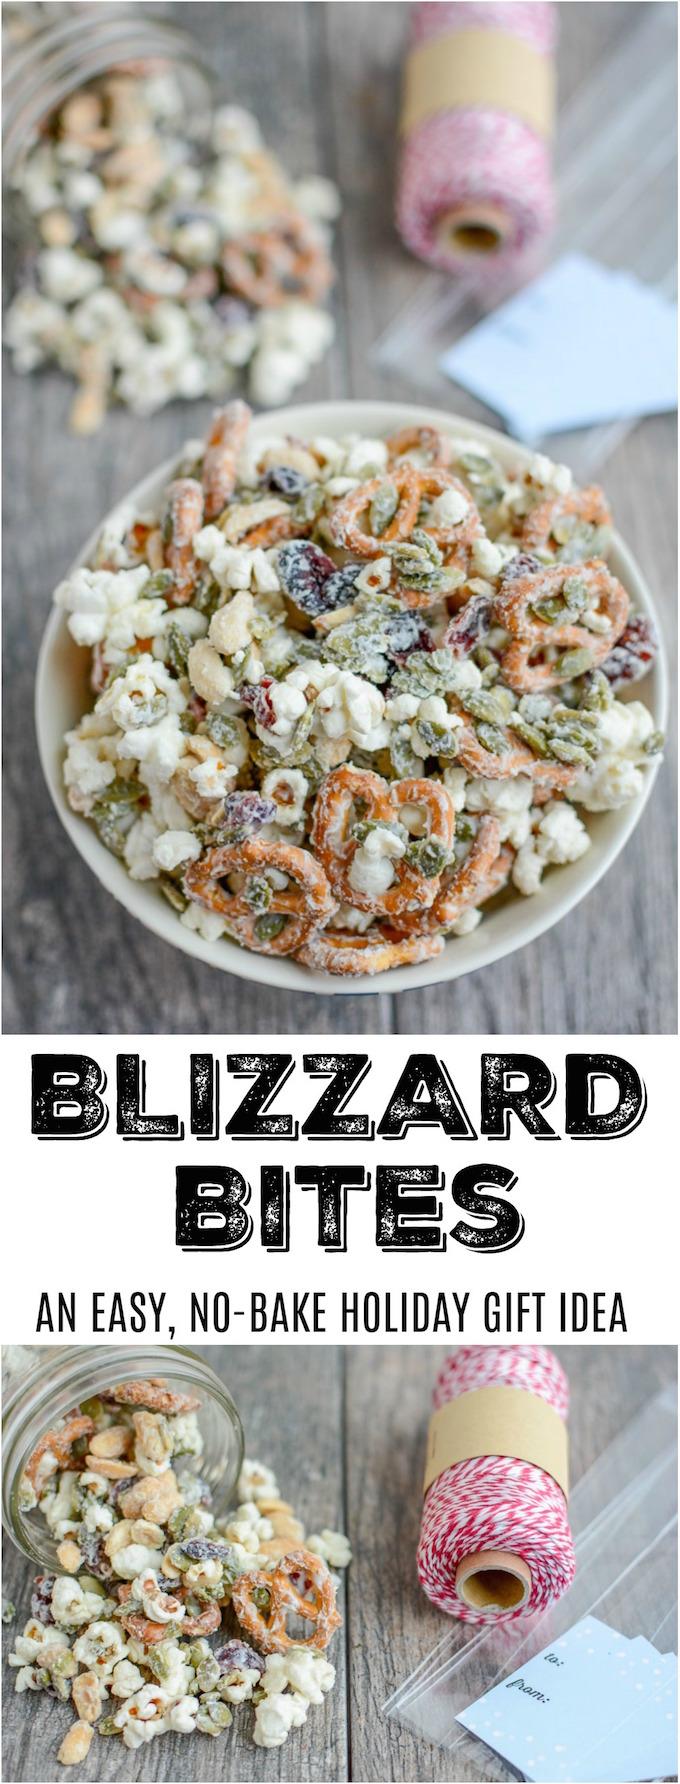 This Blizzard Bites recipe is perfect for the holiday season. Make a batch to share with family, friends, teachers, etc as an easy edible Christmas gift. 